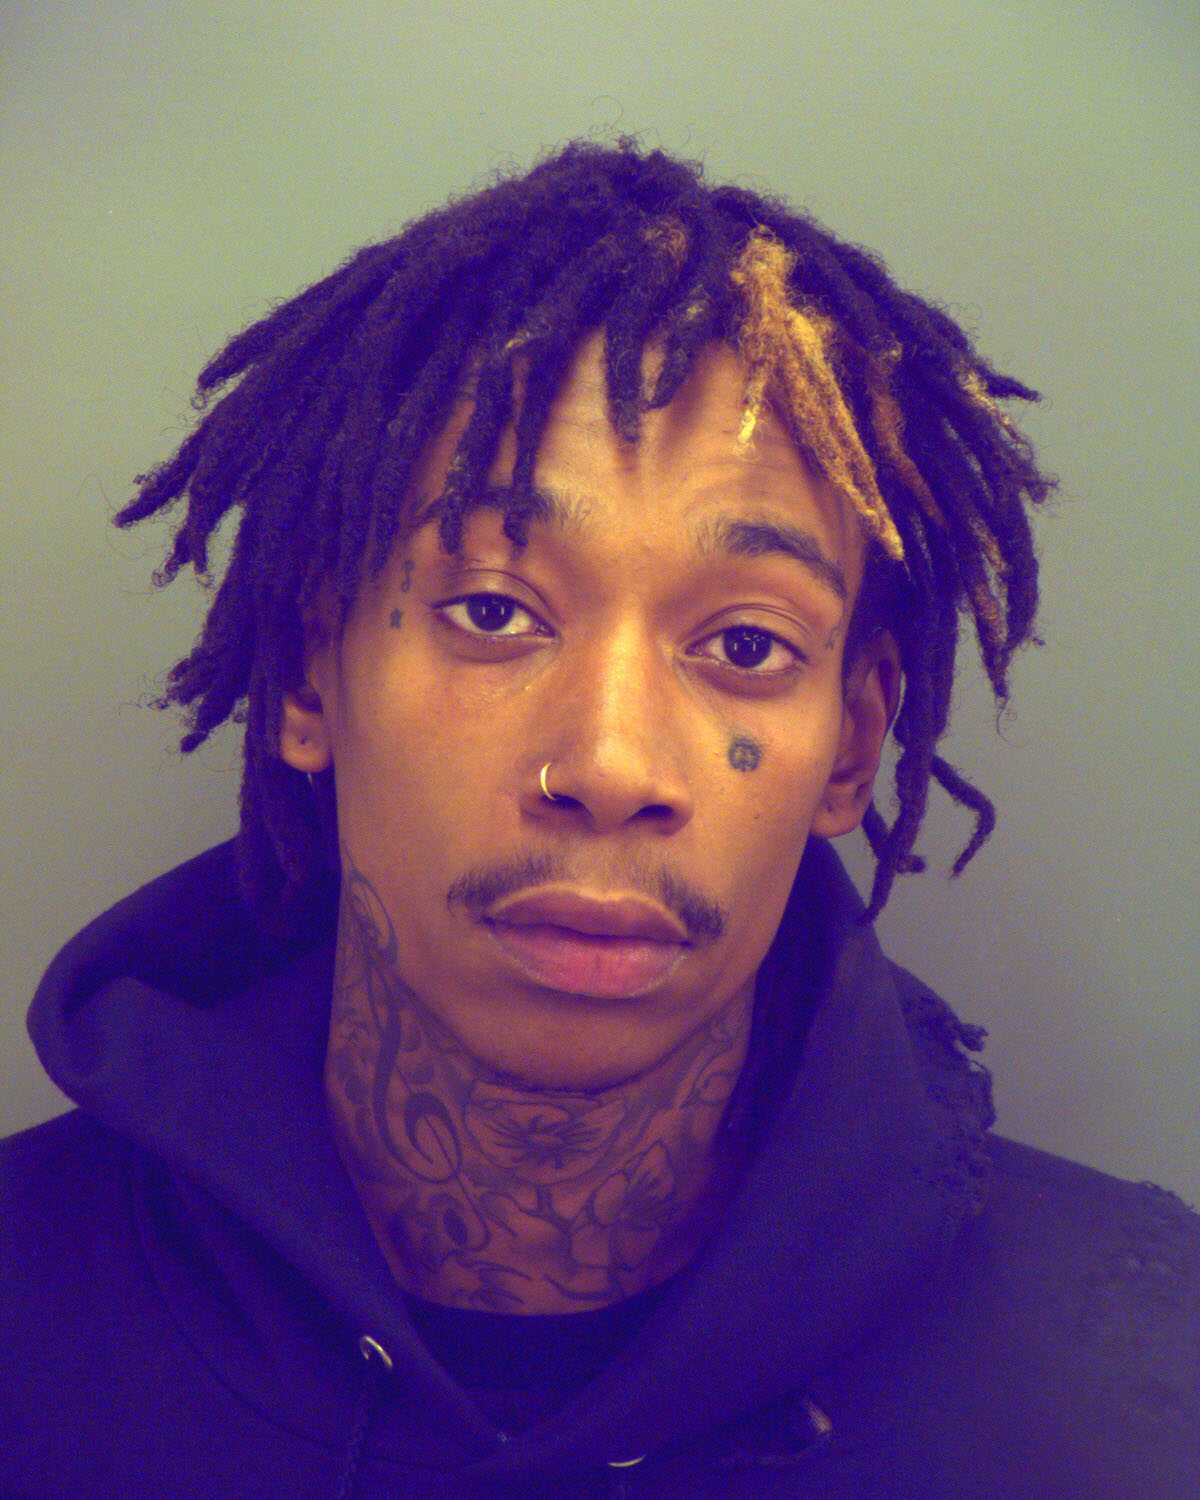 This booking photo provided by the El Paso Police Department shows Cameron Thomaz, better known as, Wiz Khalifa in El Paso, Texas, Sunday May 25, 2014. (El Paso Police Department—AP)